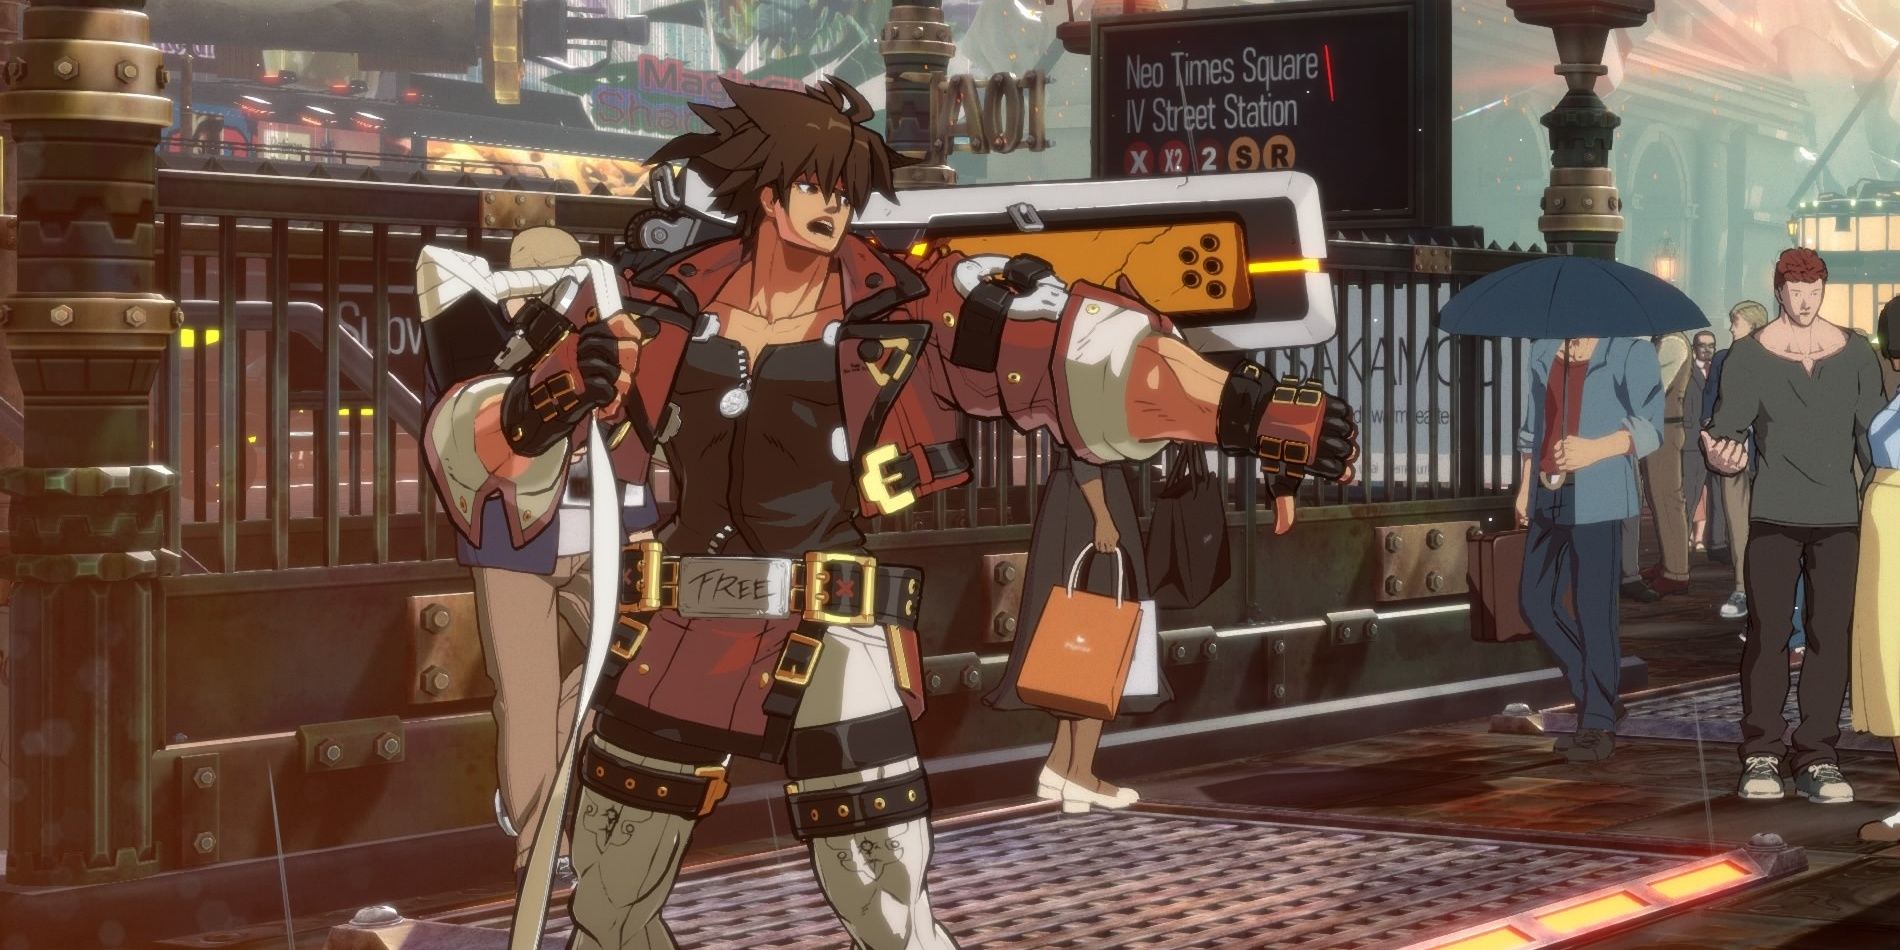 Sol Badguy taunting by giving his opponent a "thumbs down" in Guilty Gear -Strive-